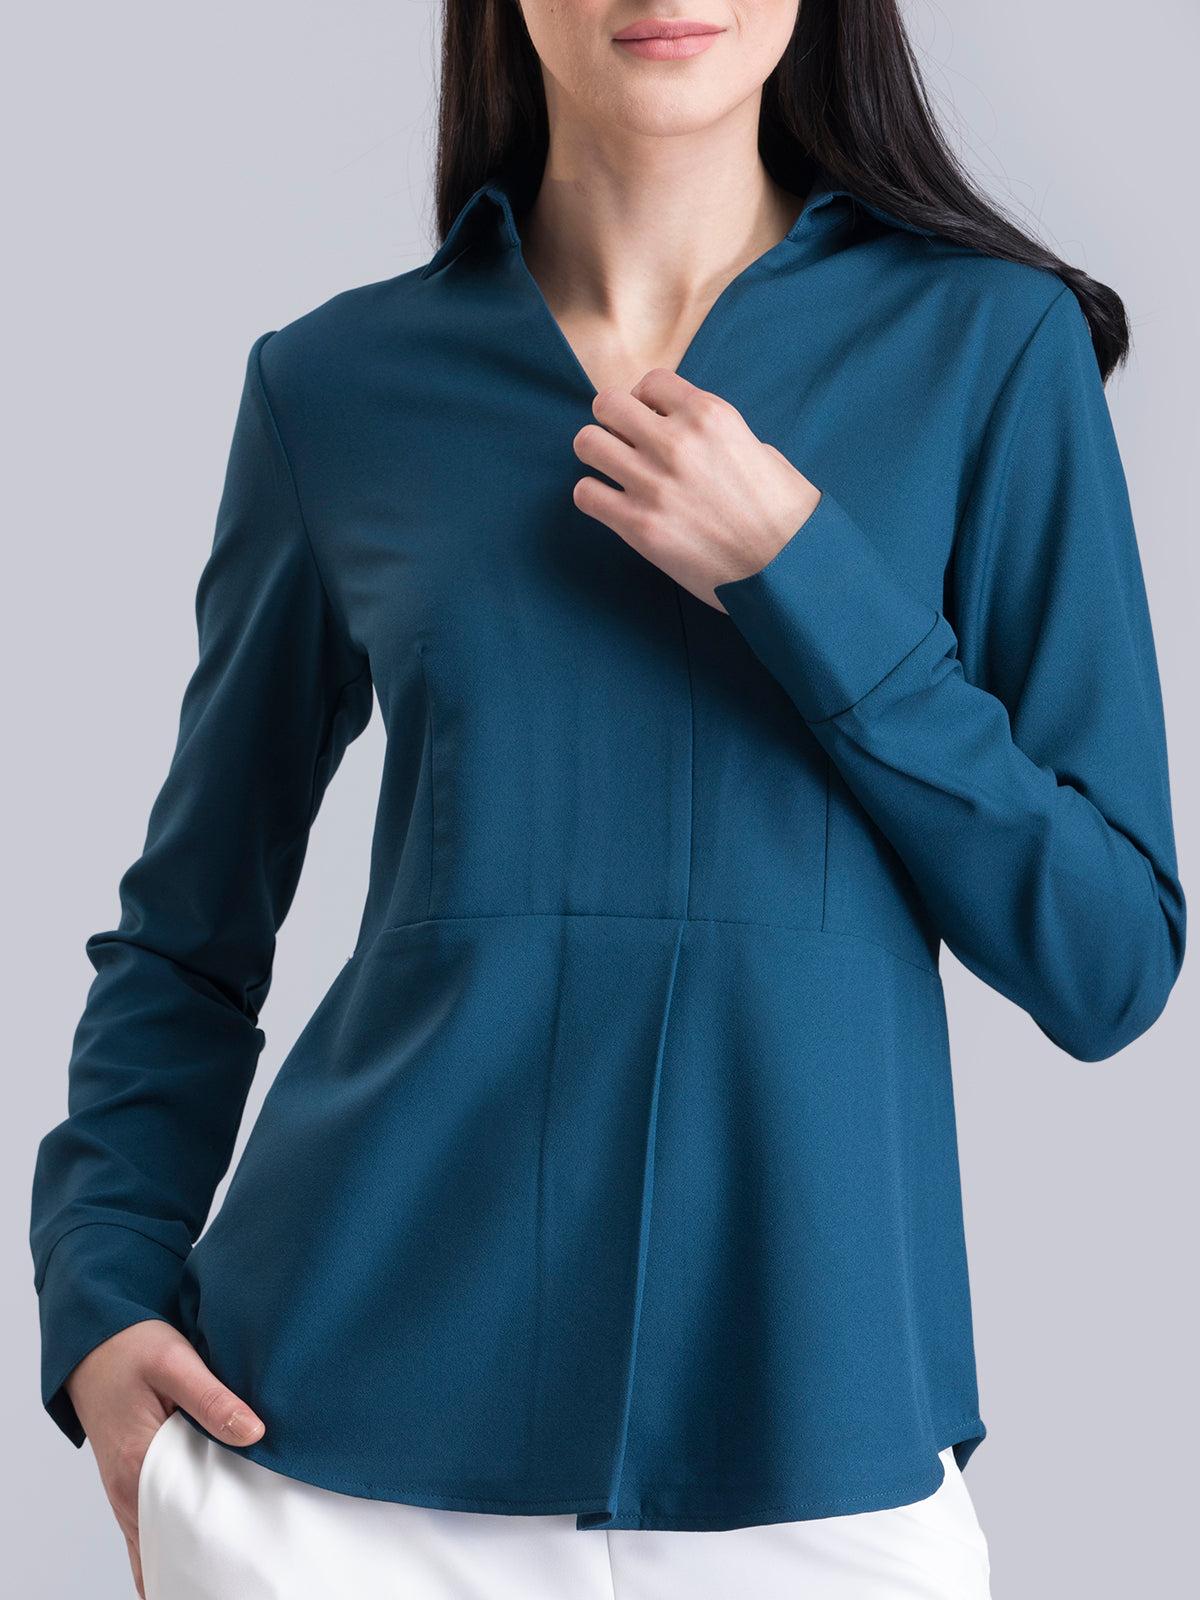 Collared Pleat Detail Top - Teal| Formal Tops